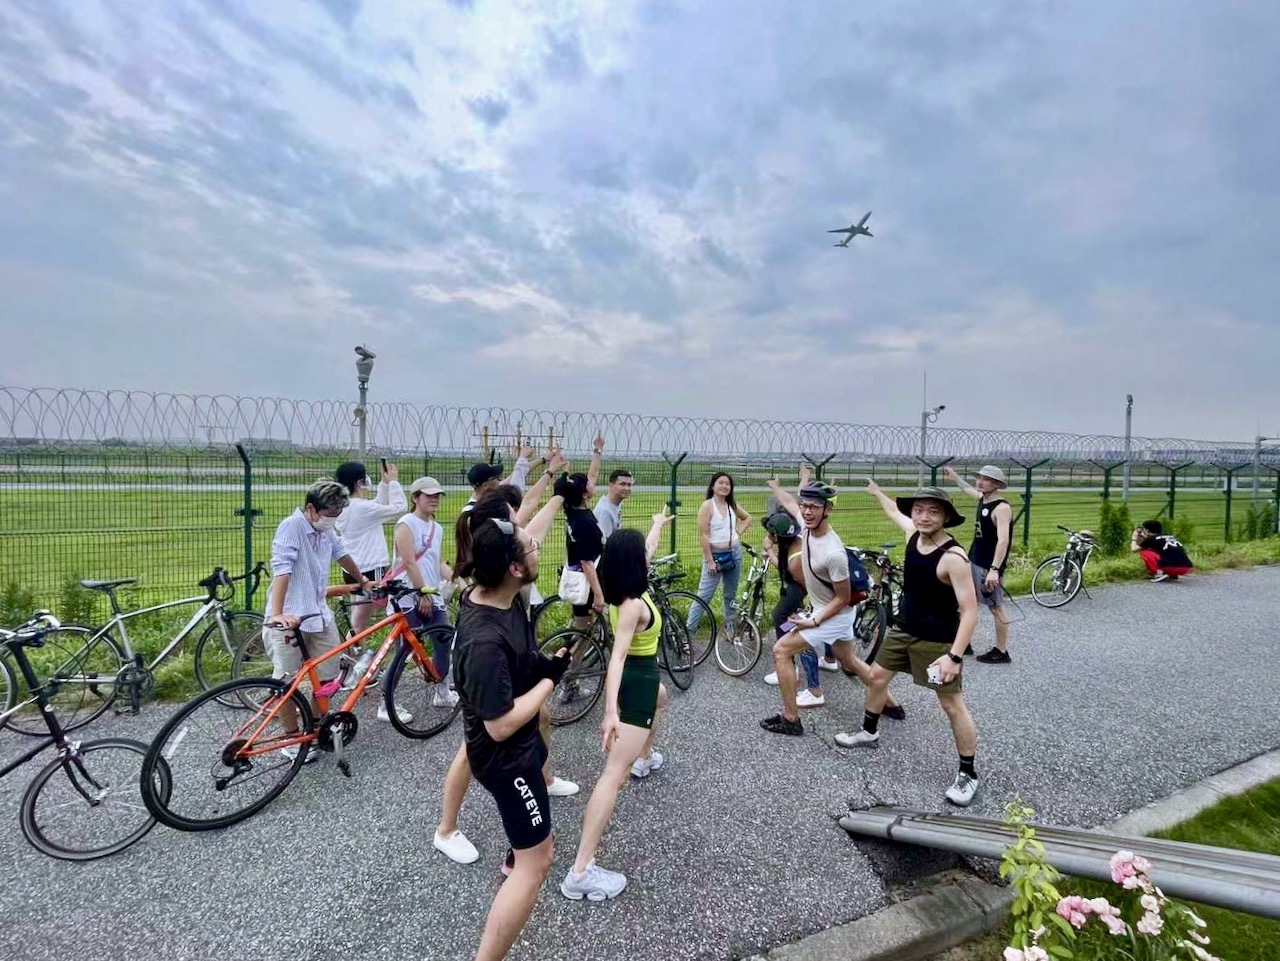 Ride with Luneurs 2022年7月 “看飞机”活动图 Luneurs 图